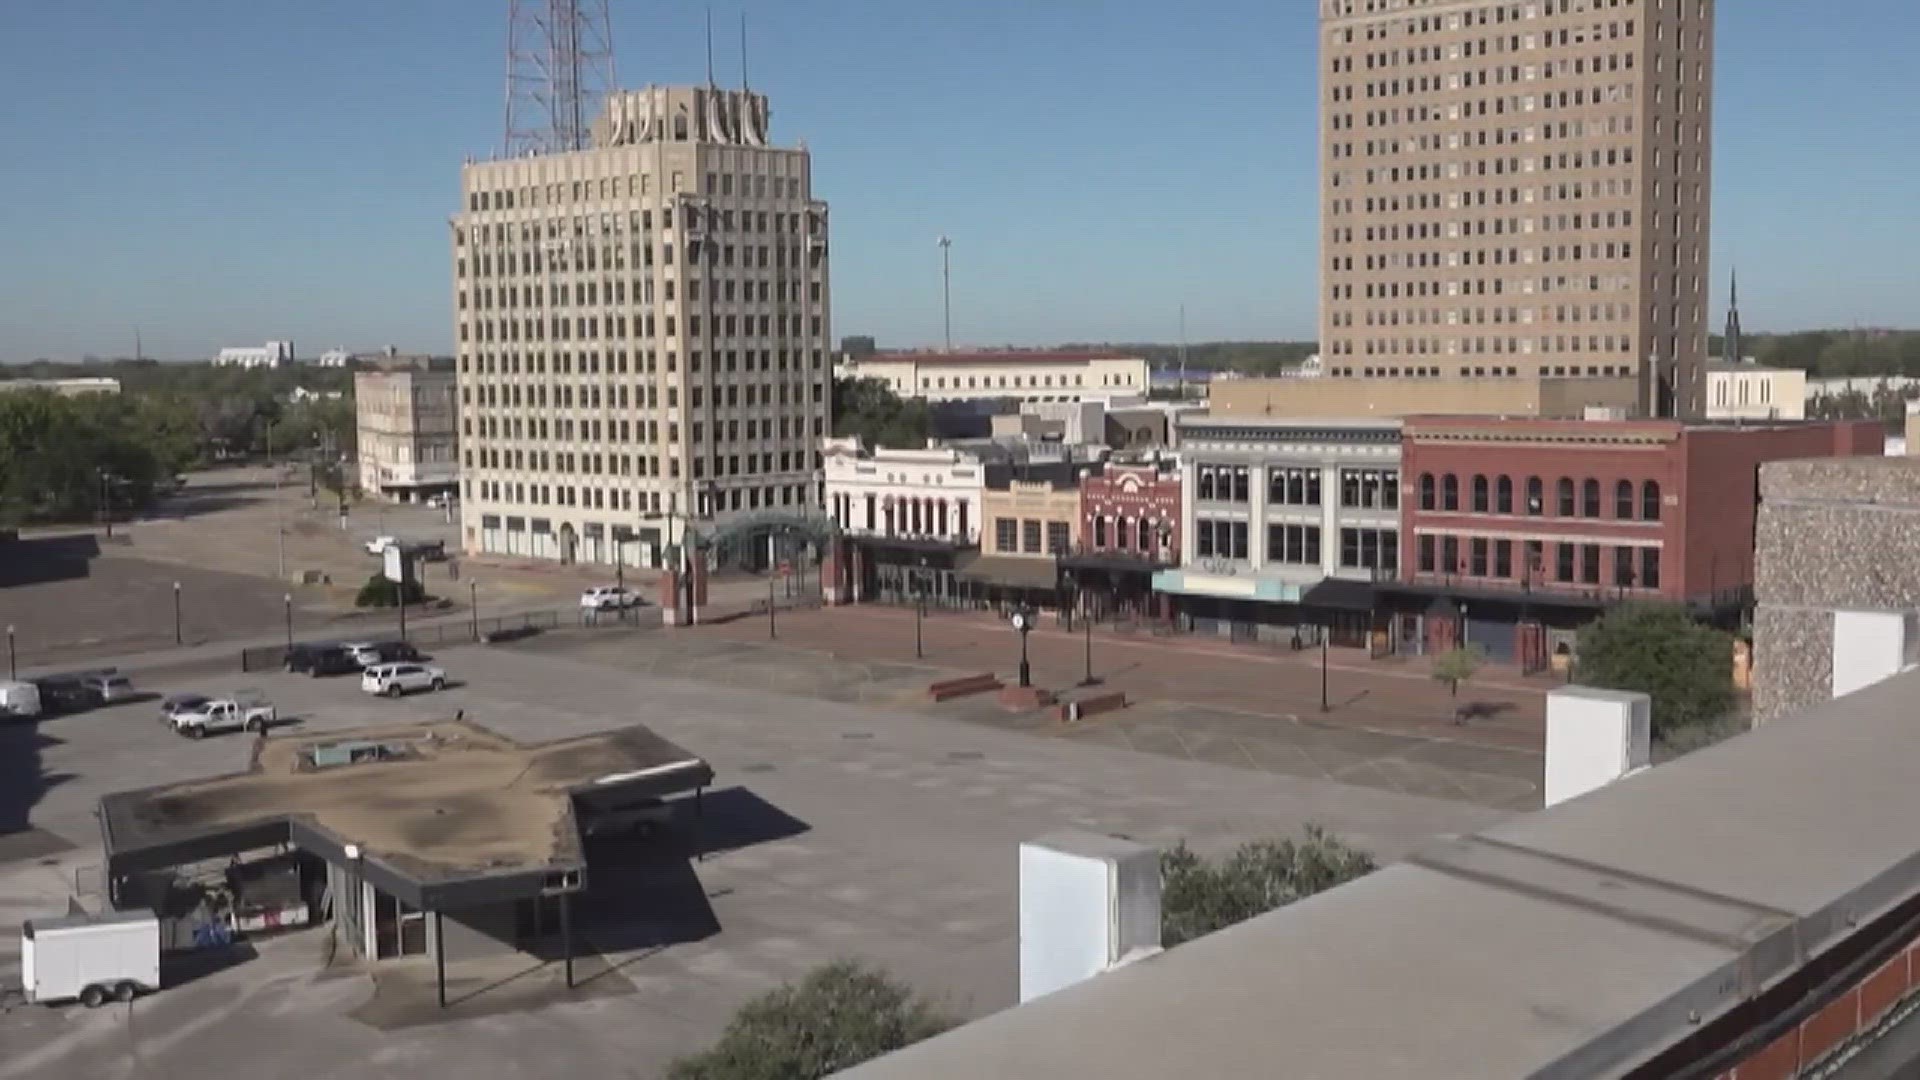 Officials had to submit five places filmmakers might be interested in and those places included Riverfront Park, areas in downtown Beaumont and Tyrell Park.